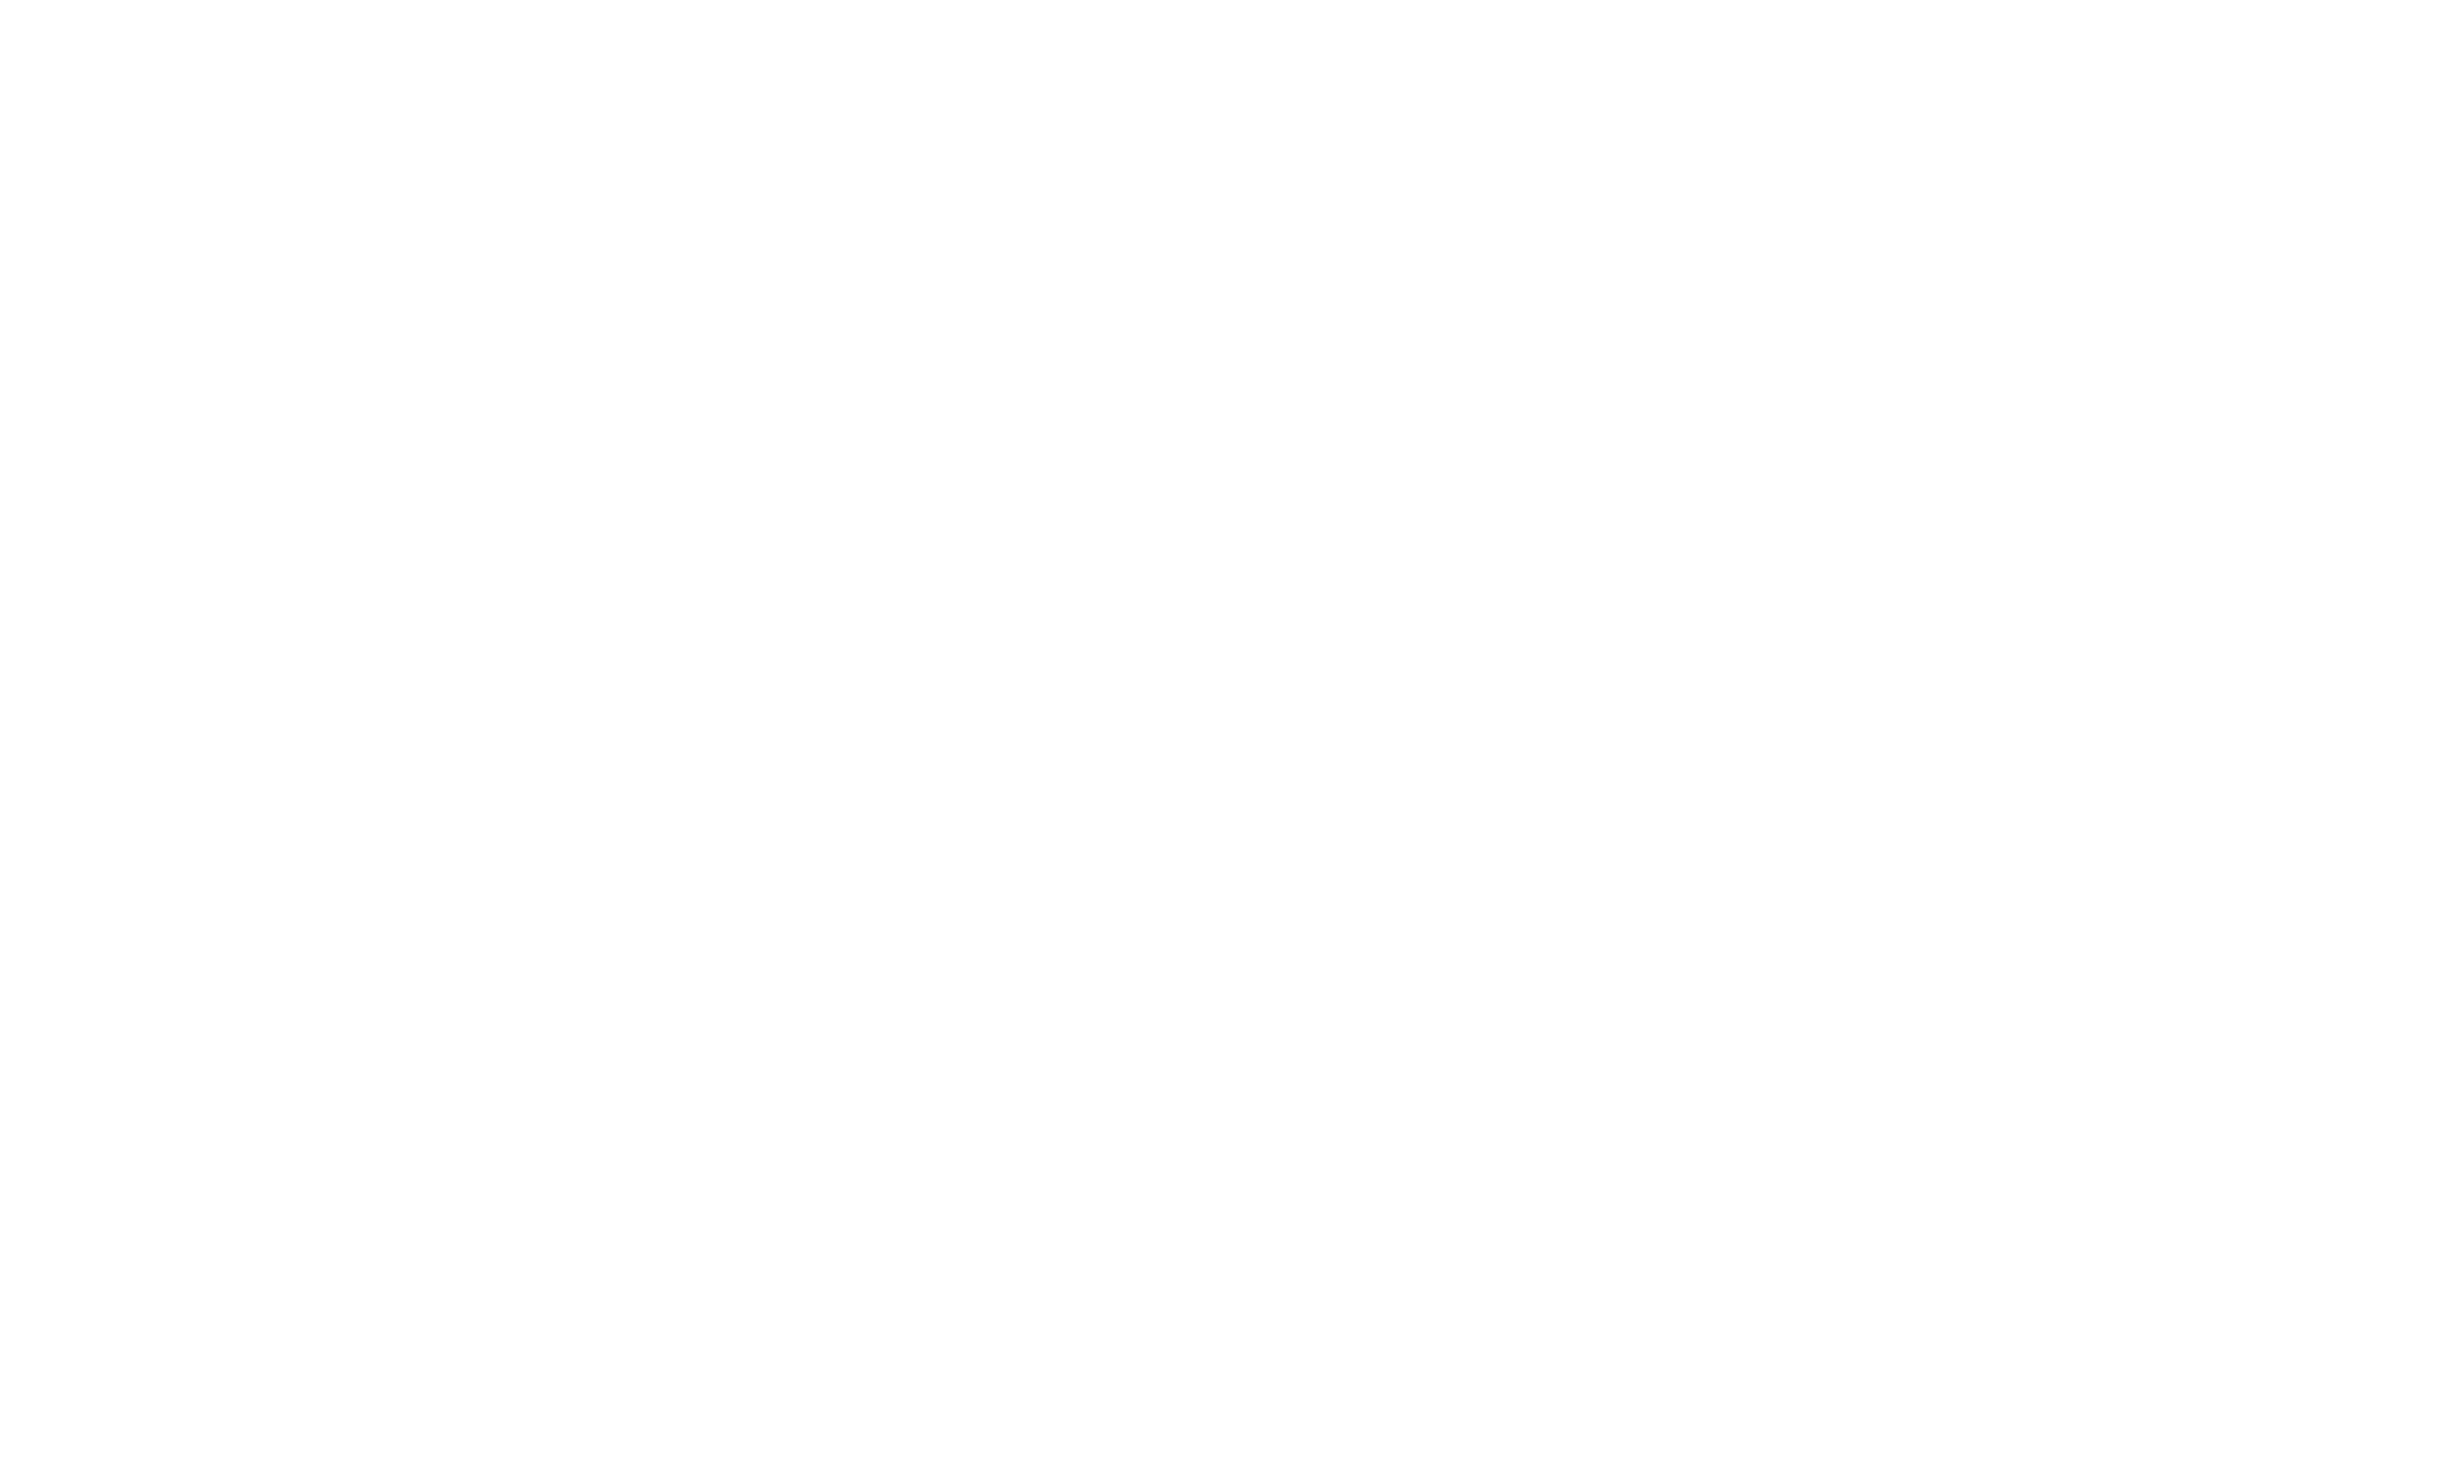 Bloomables®